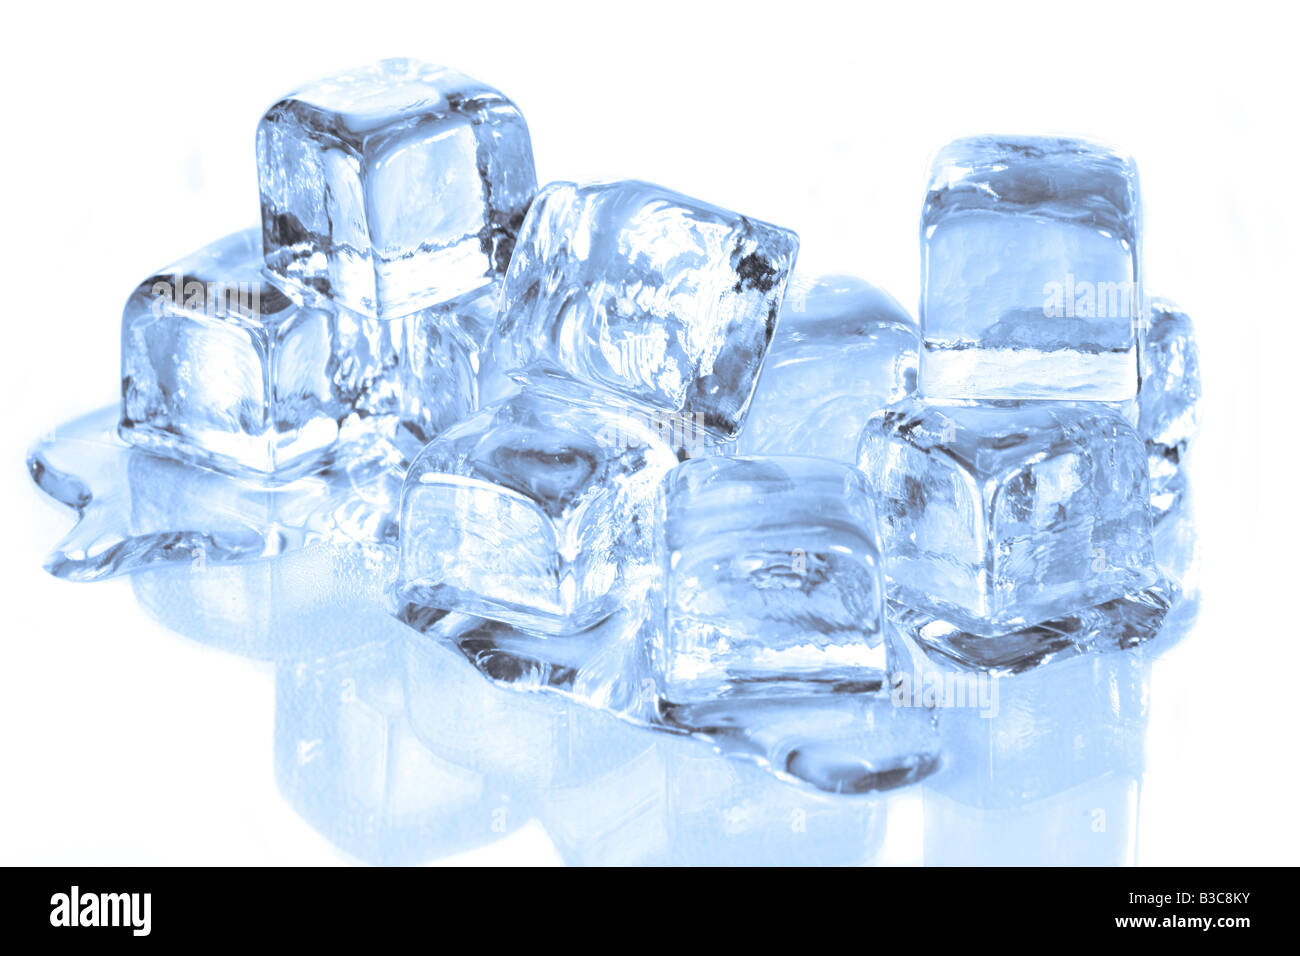 Ice Cubes Melting on a Reflective Surface Stock Photo